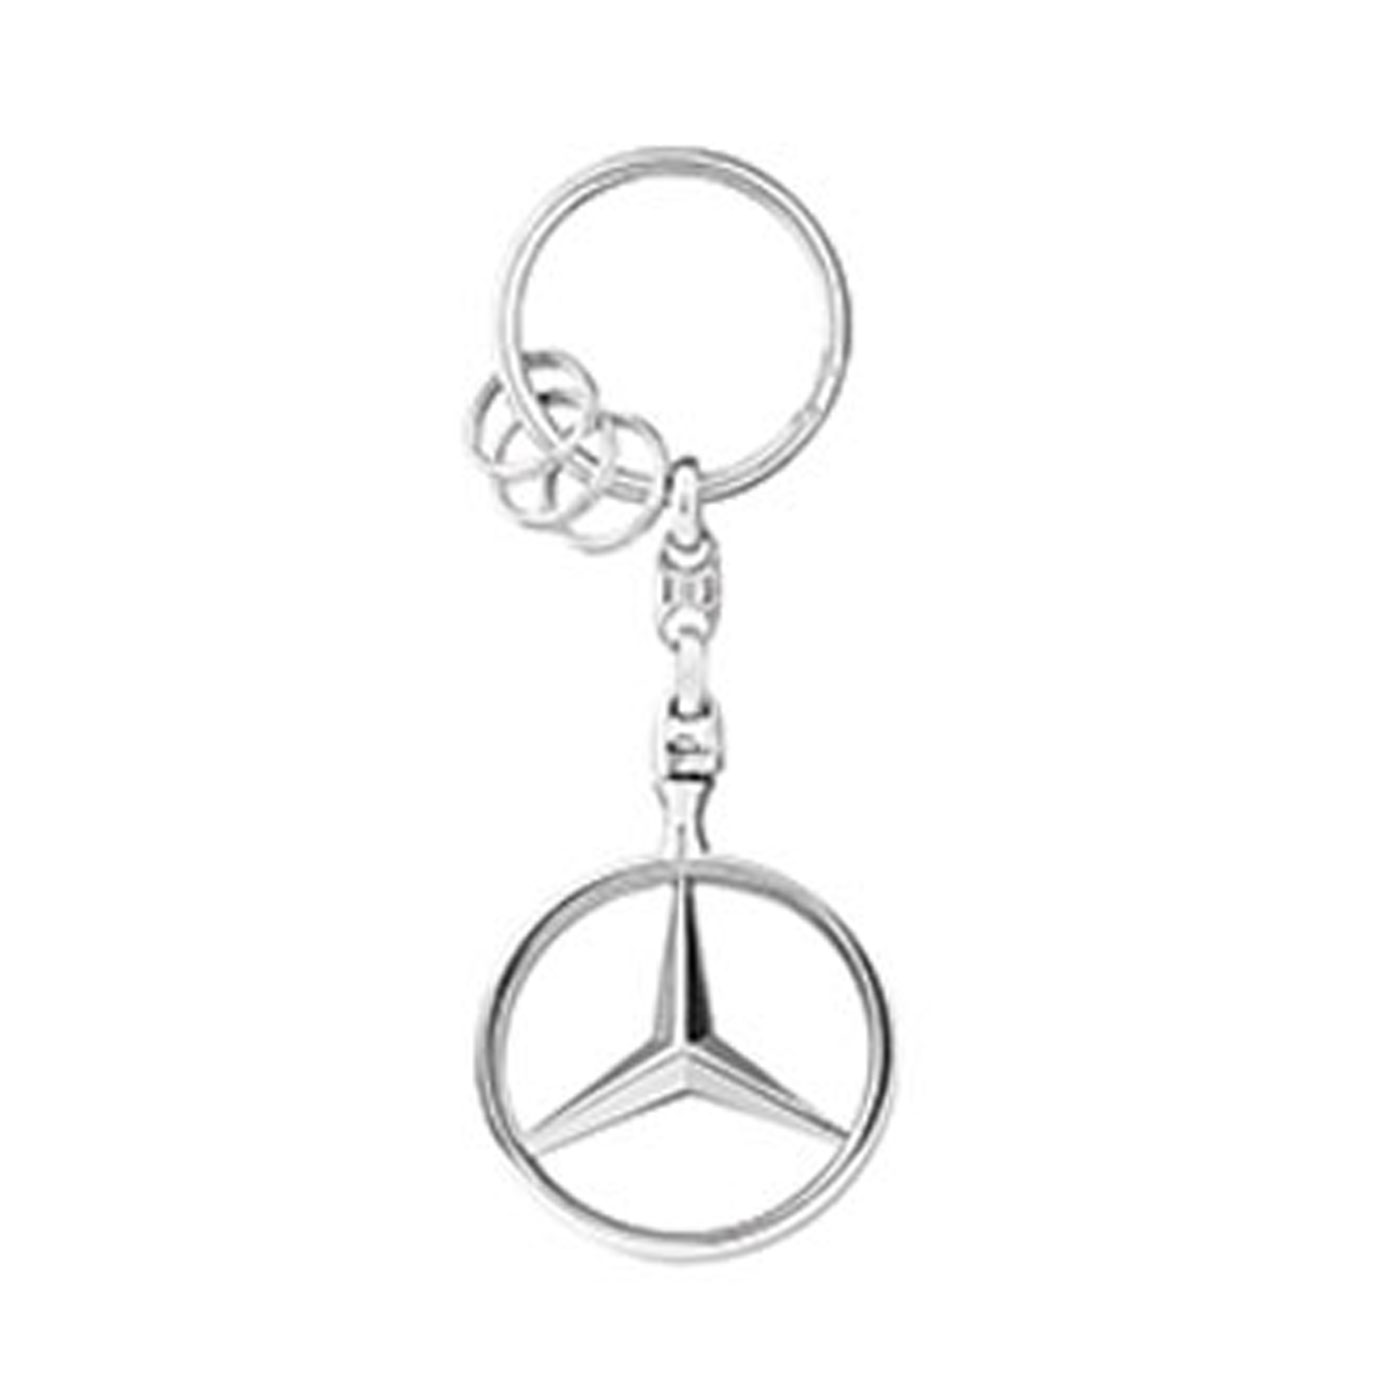 AMG Gt Stainless Steel Key Ring | Mercedes-Benz Lifestyle Collection